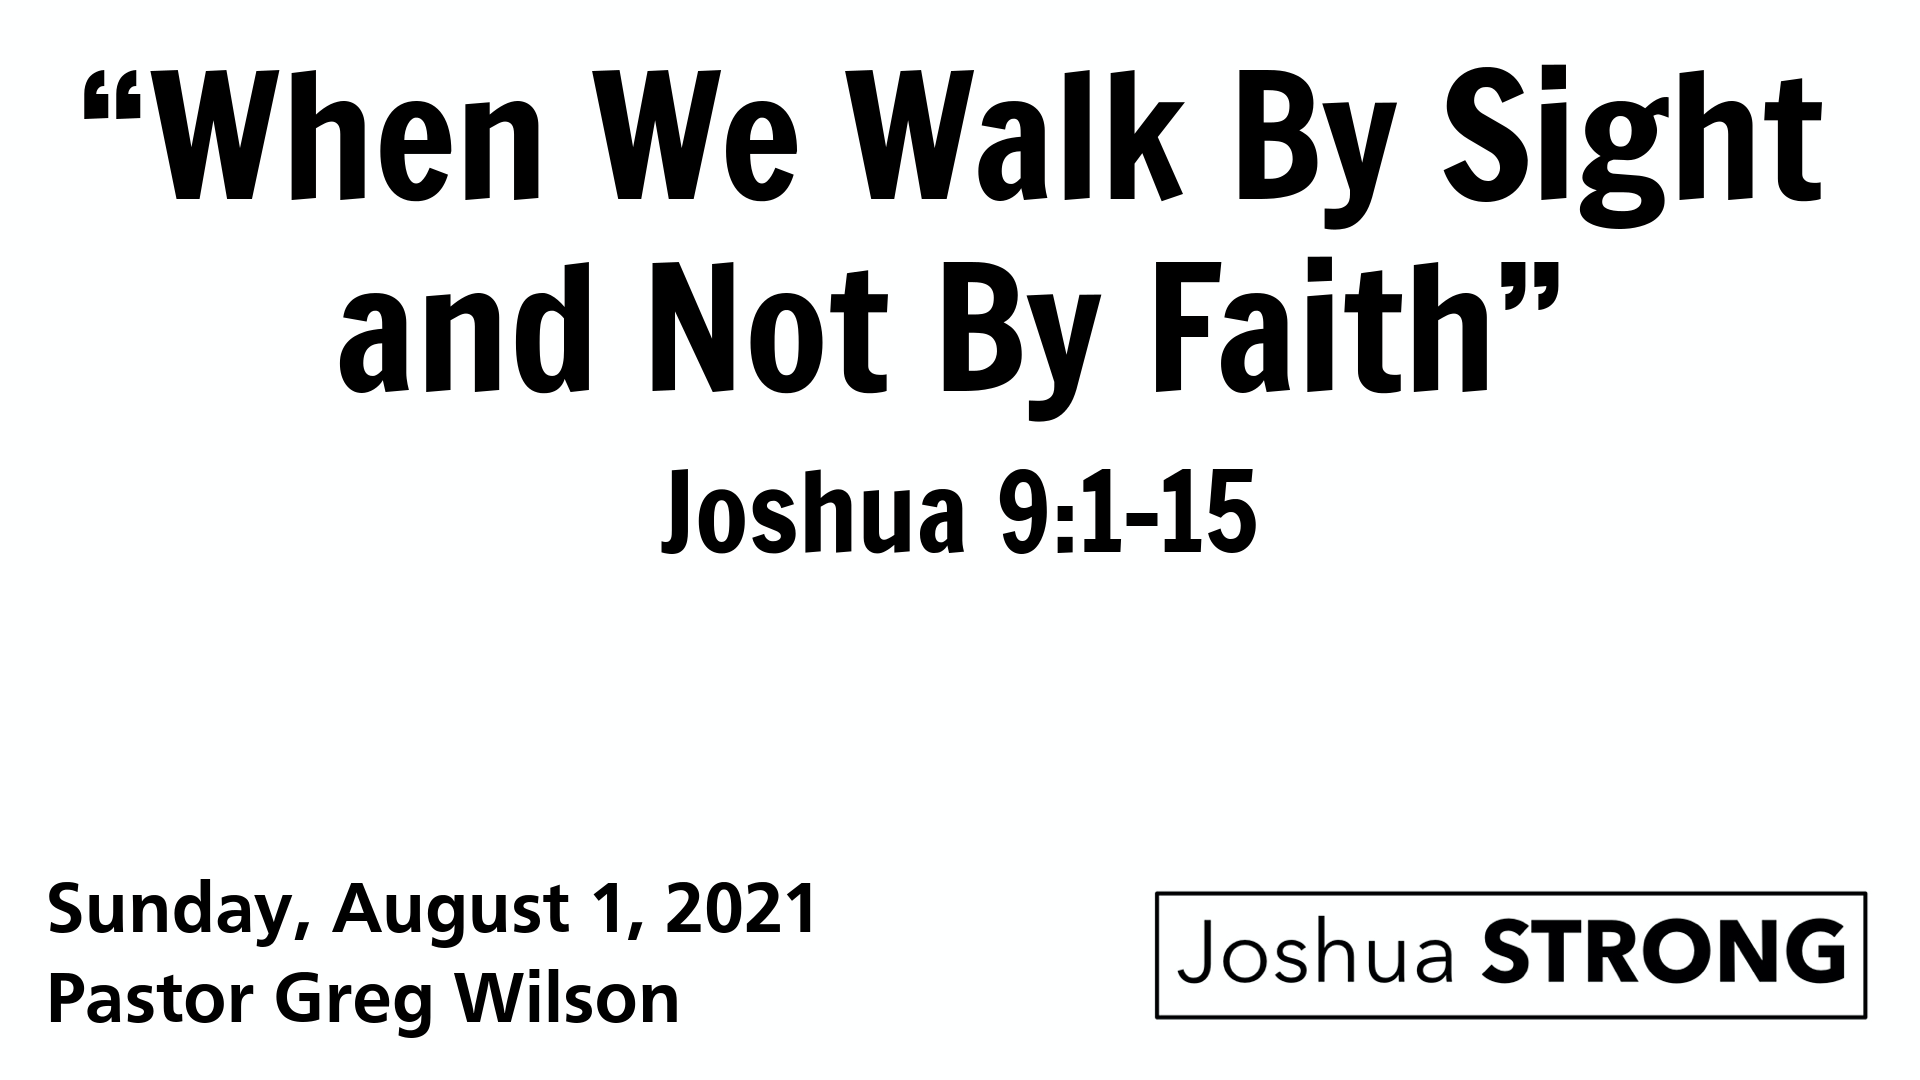 “When We Walk By Sight and Not By Faith”